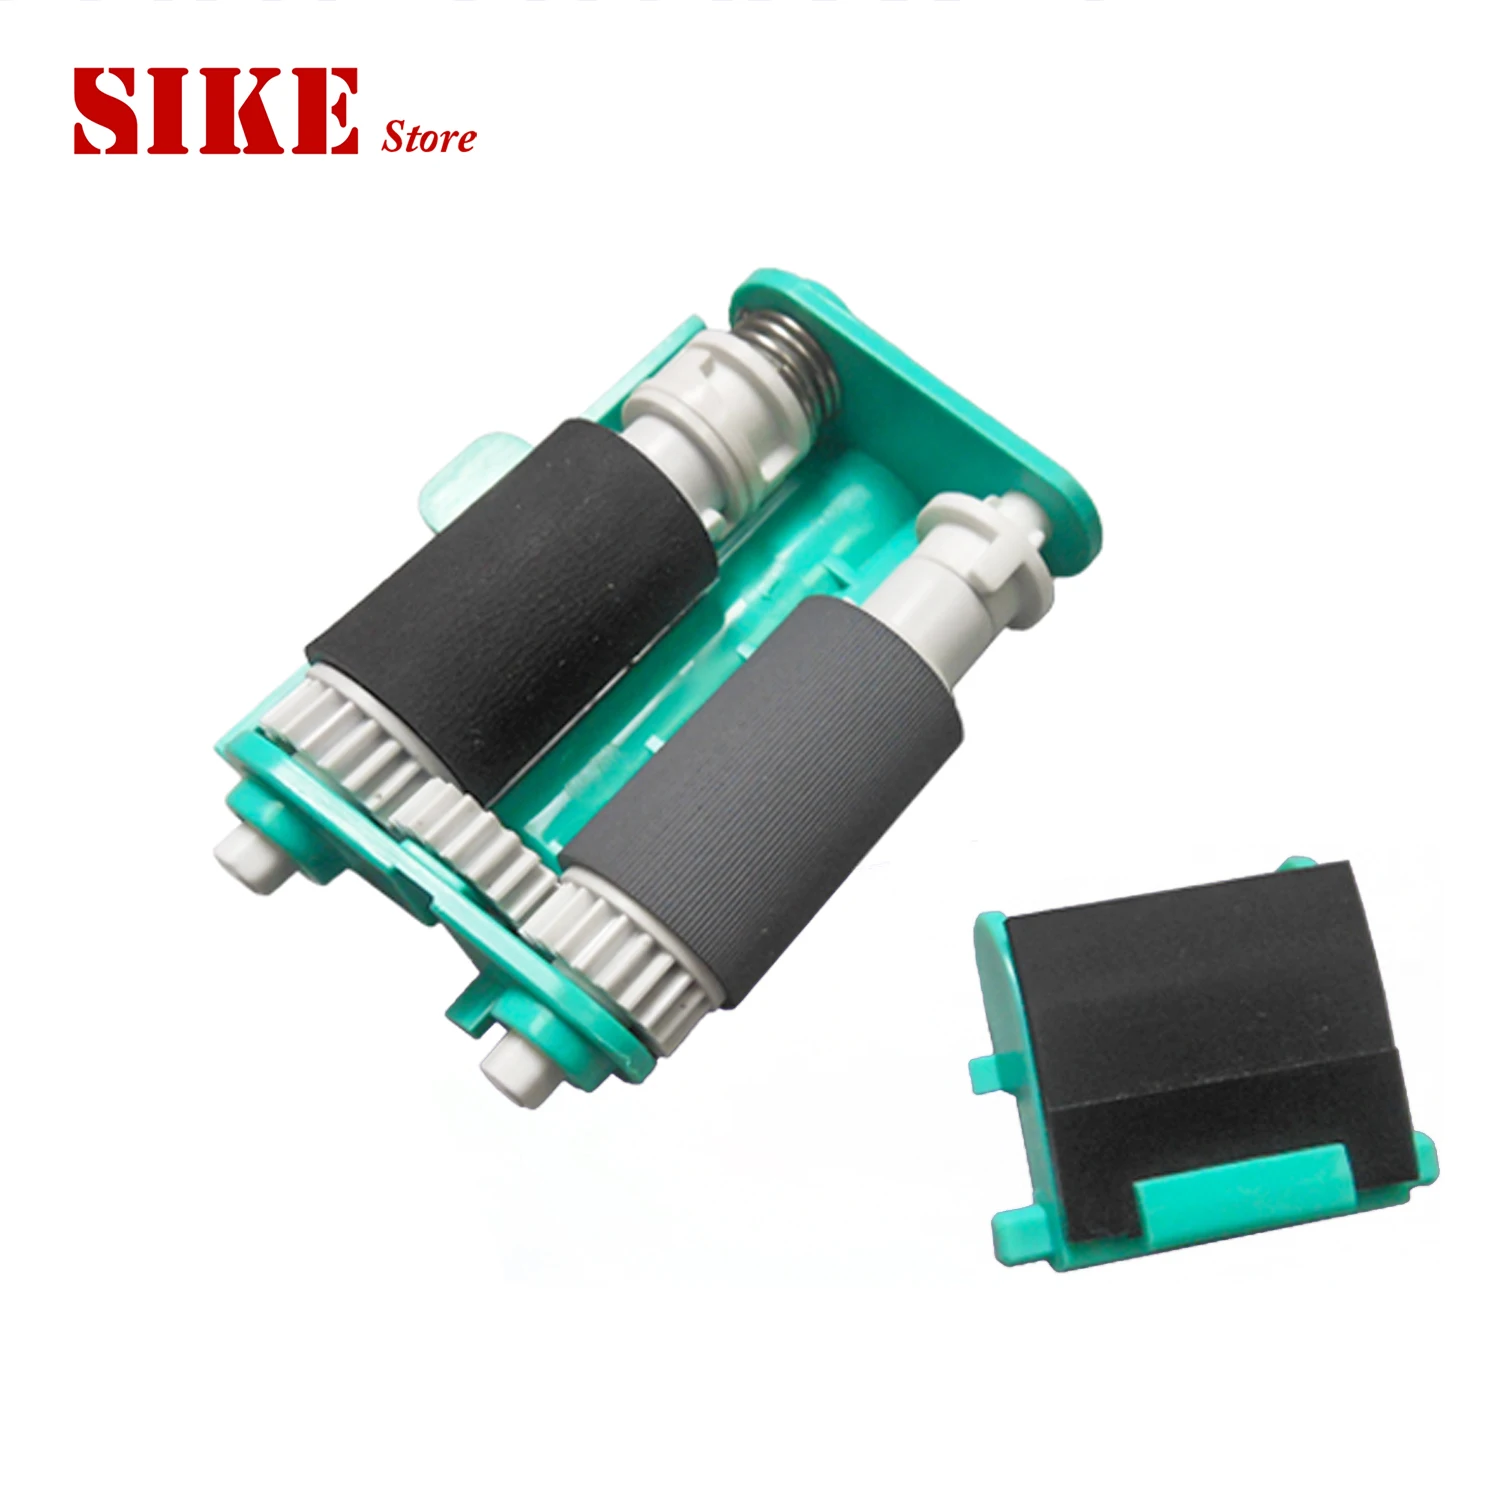 

L2700-60008 L2701A Pickup Roller For HP Scanjet N6310 N6300 N6350 6310 6300 6350 ADF Roller Replacement Kit